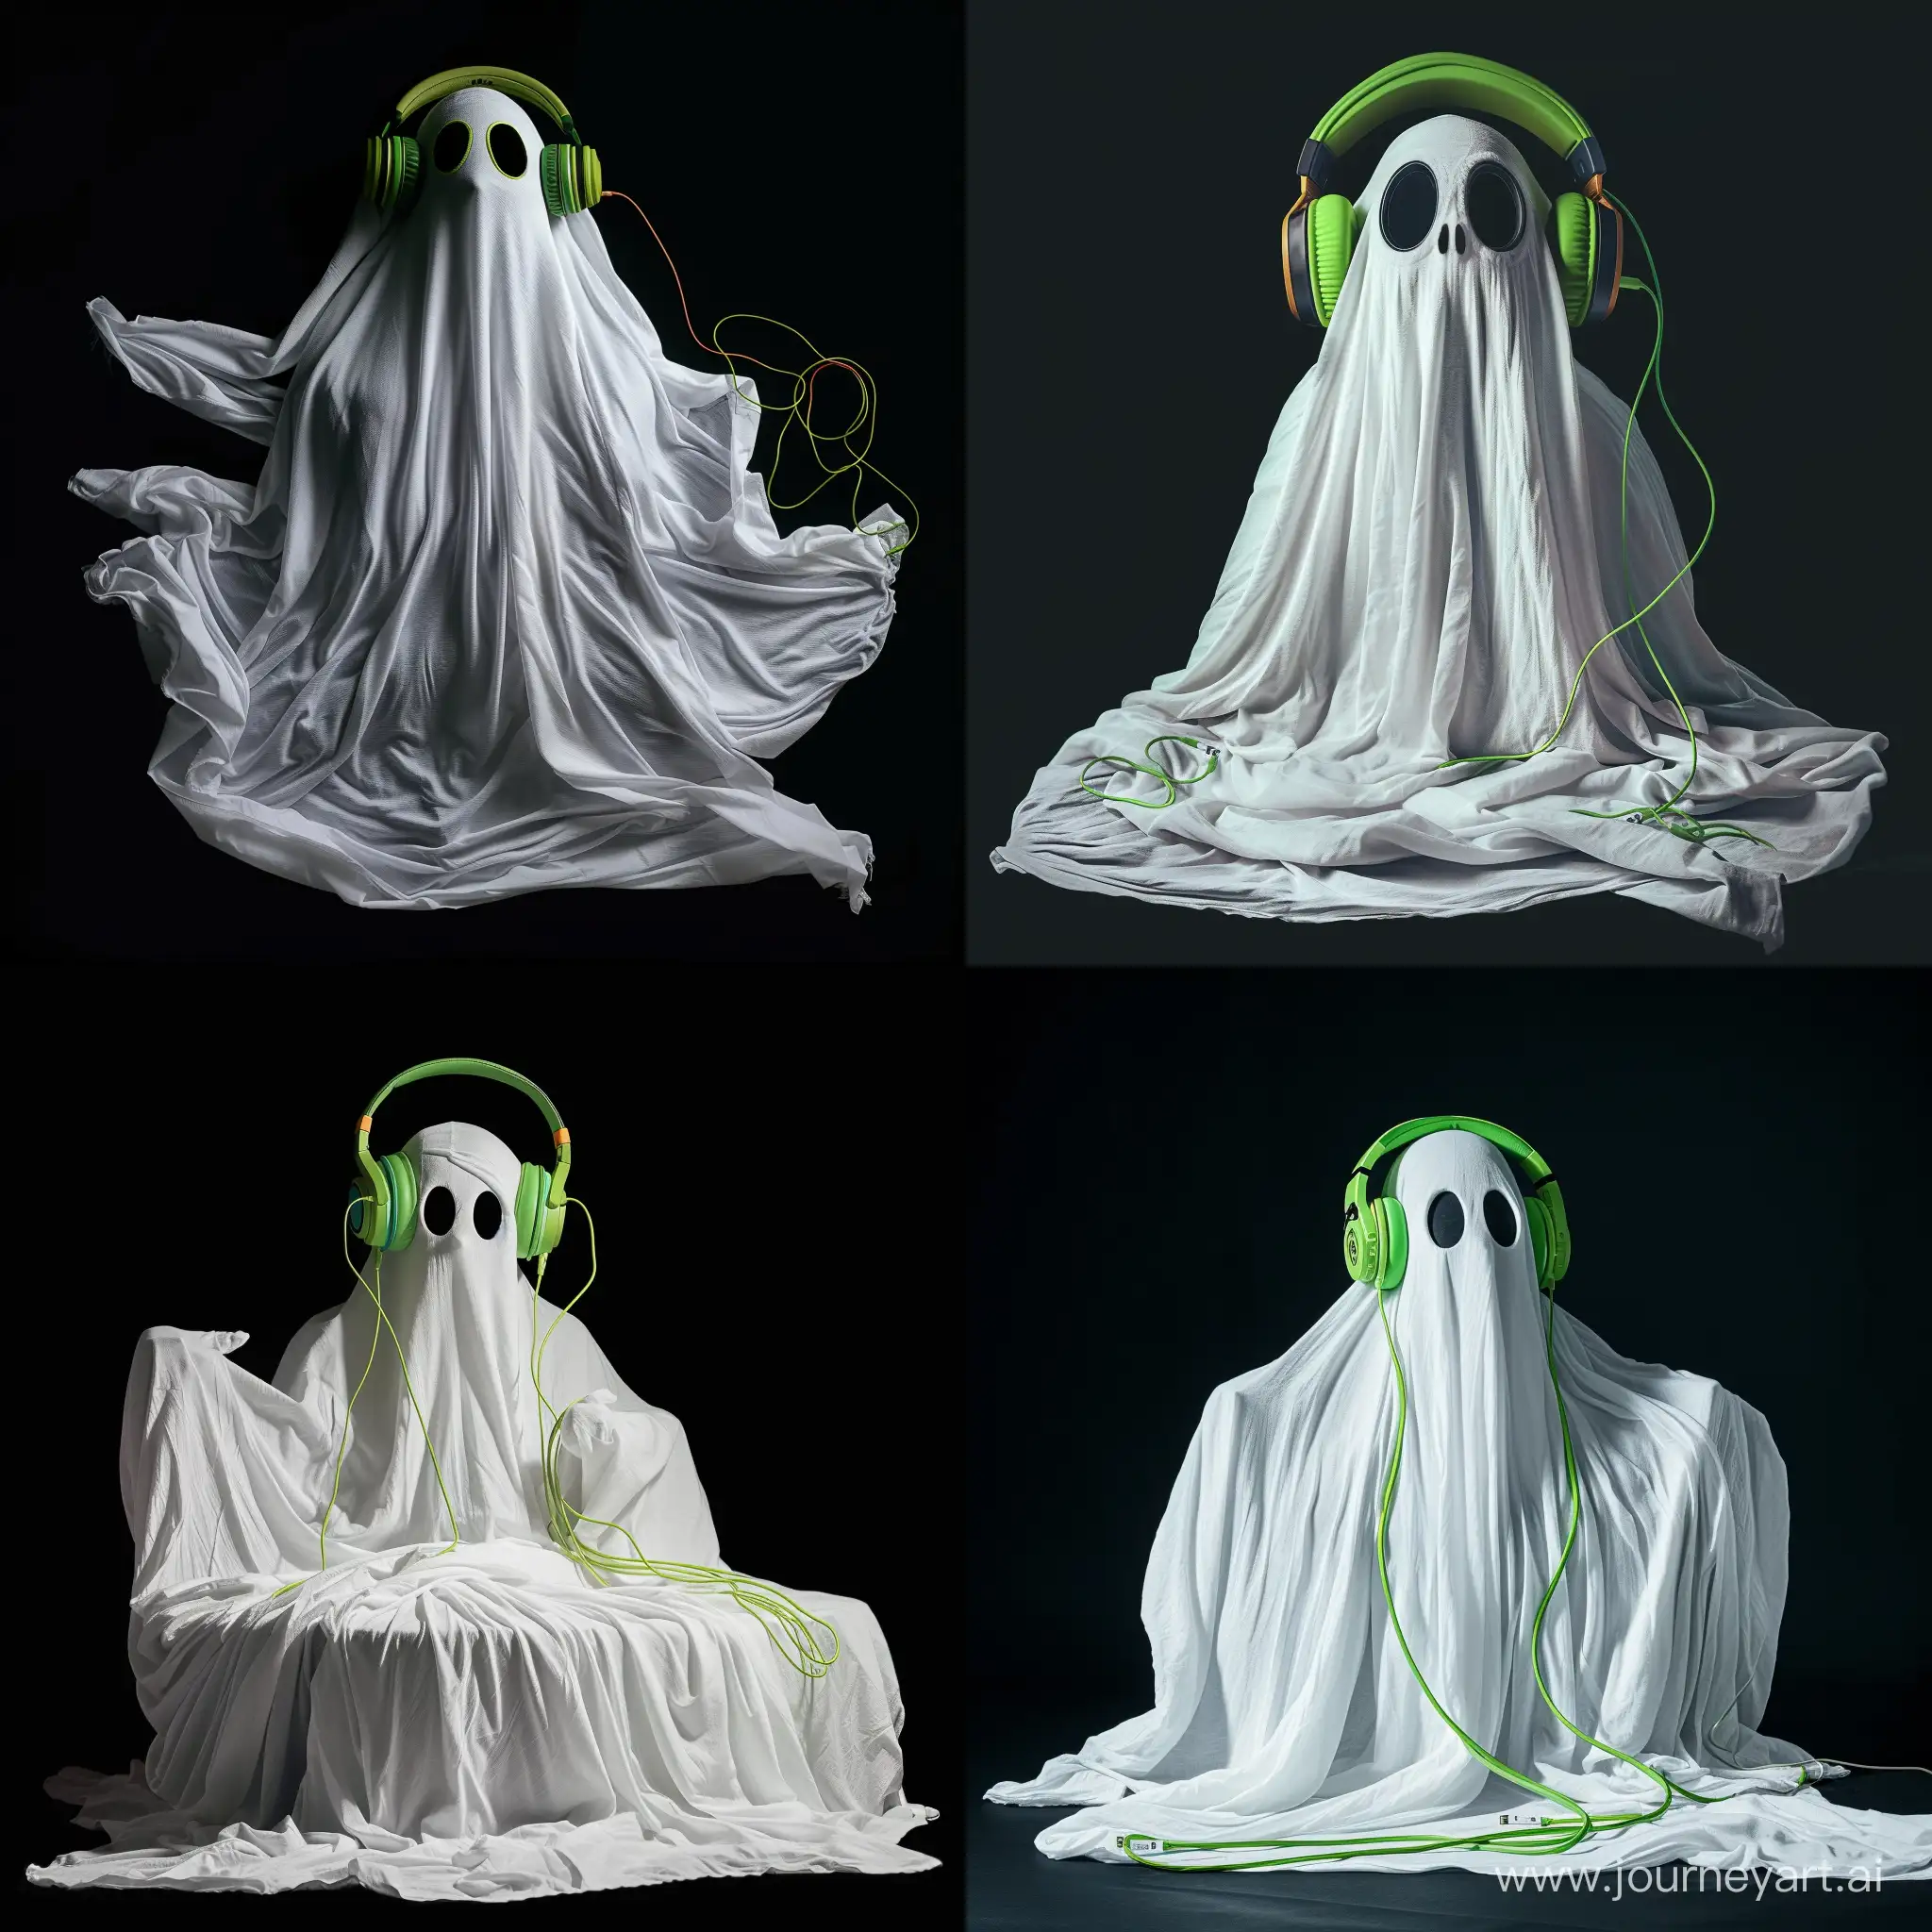 Friendly Ghost in a white sheet with green headhpones on and a black background